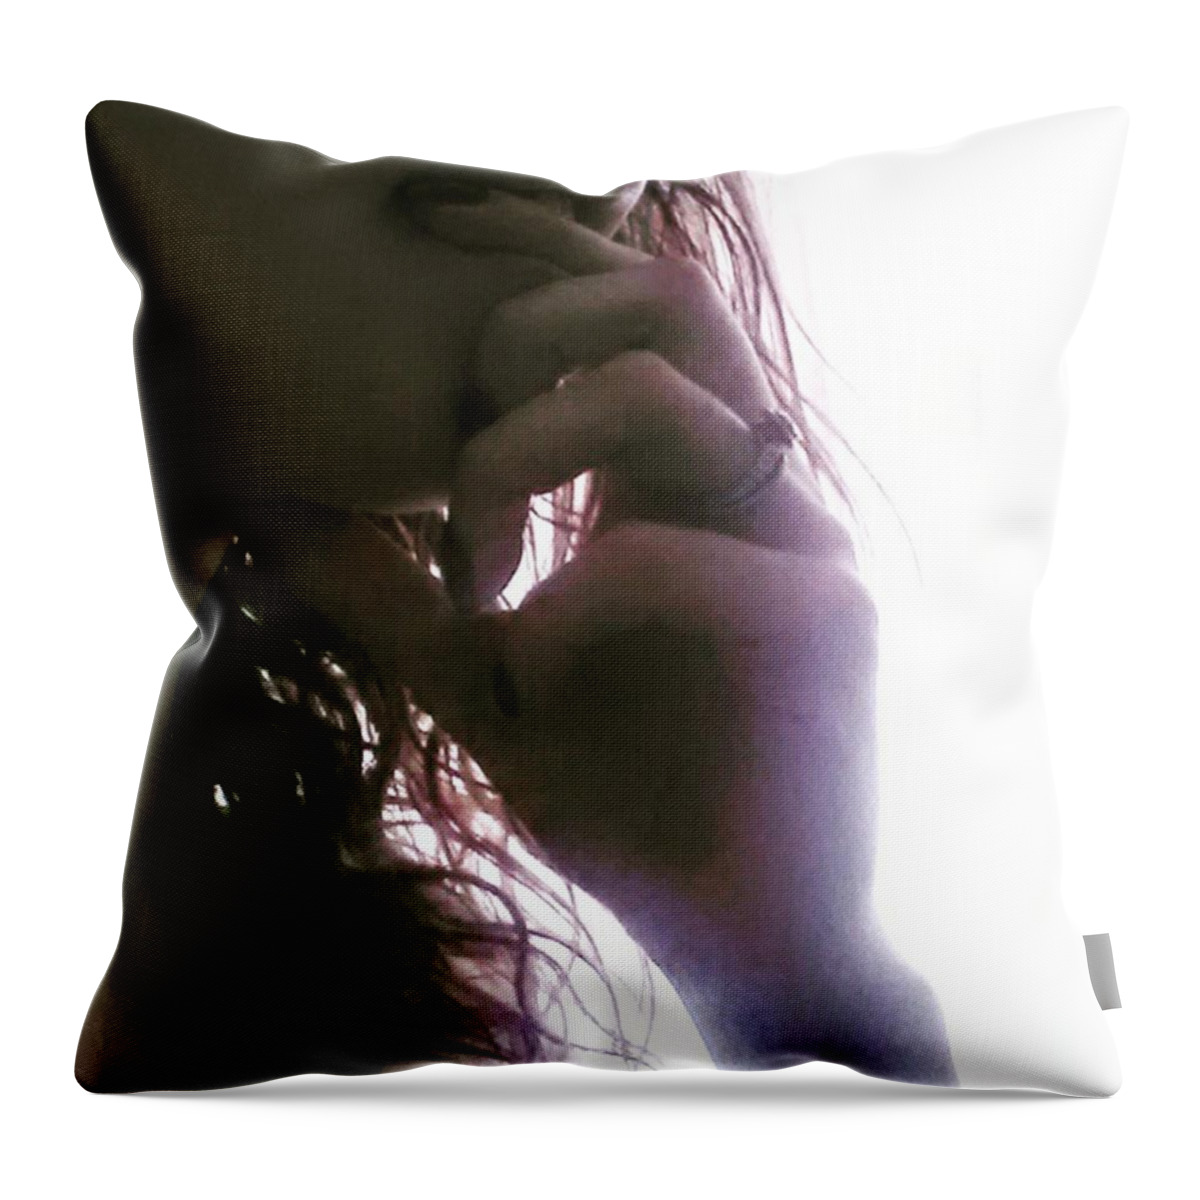  Throw Pillow featuring the photograph Anticipating A Sexy Week by Sammy Shayne